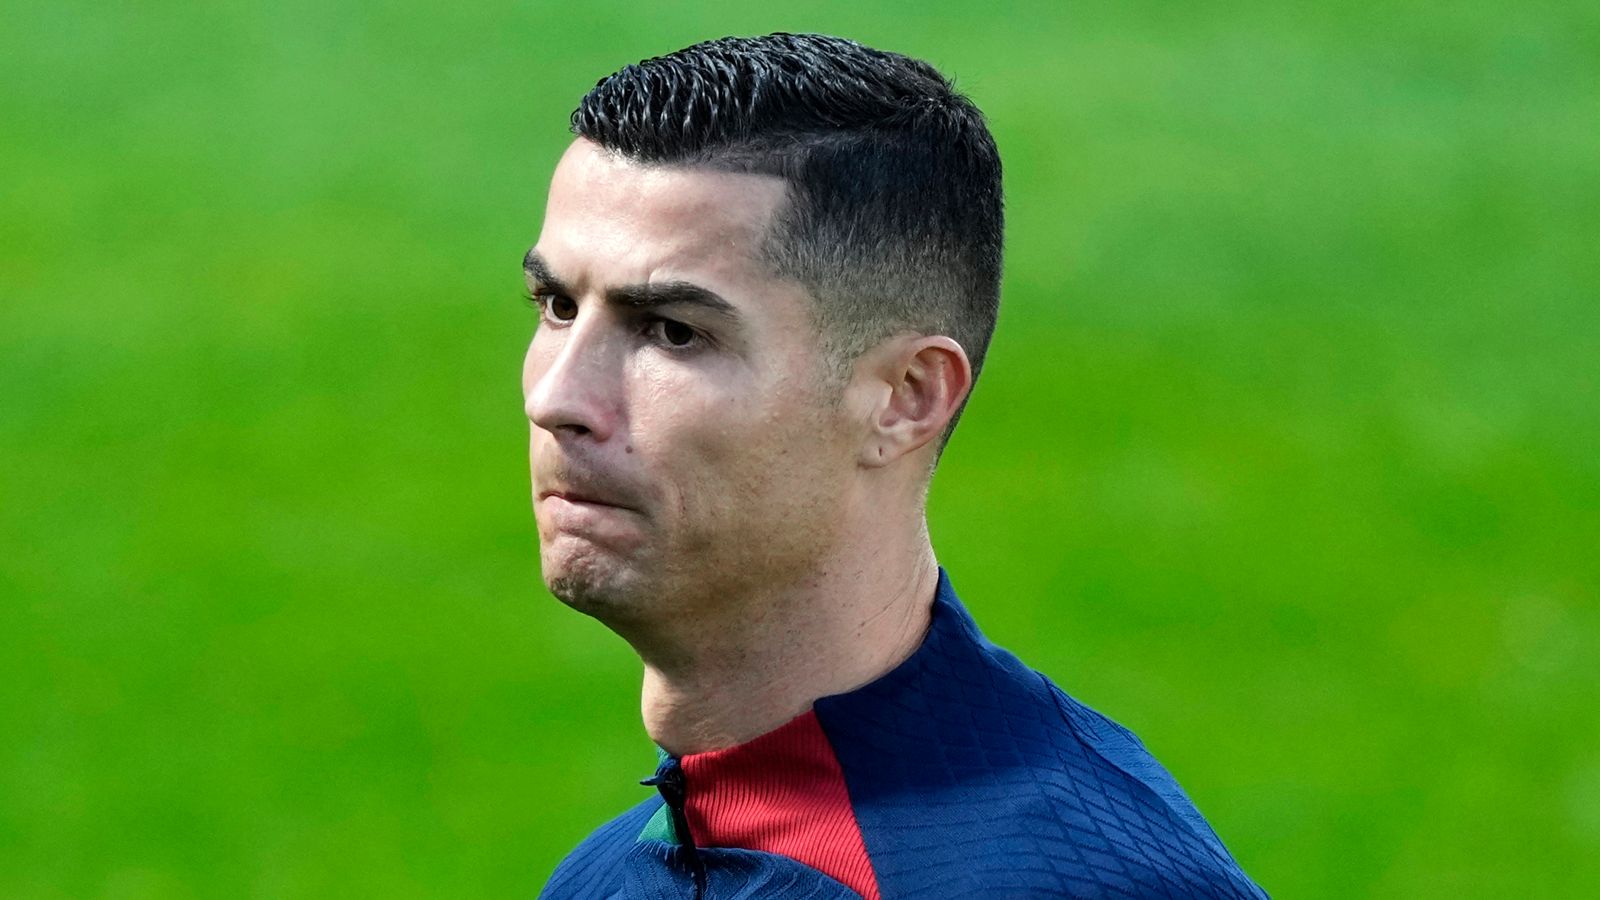 Cristiano Ronaldo faces new legal challenge from rape accuser over 2010 hush money deal | World News